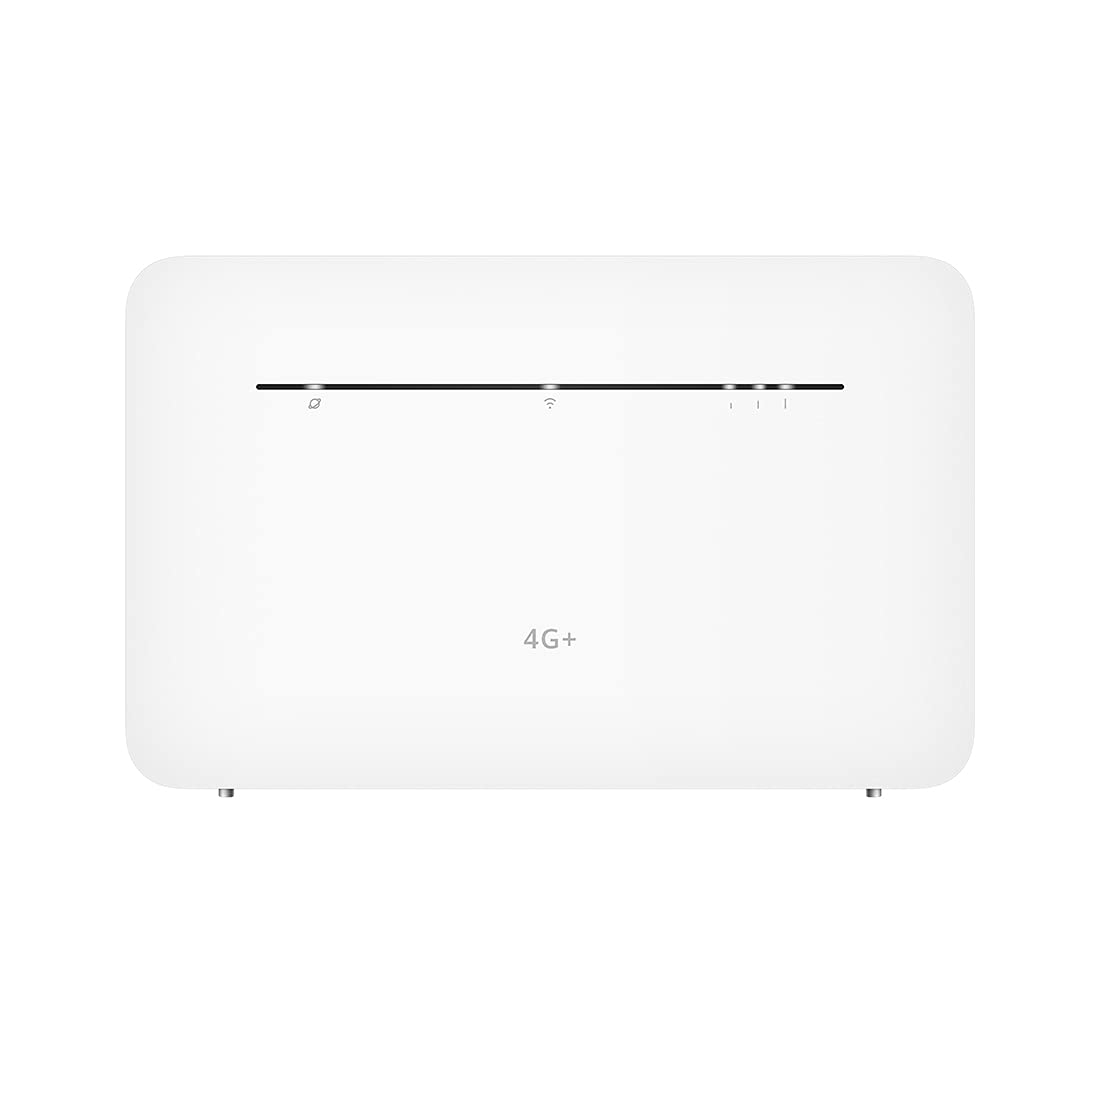 B535-333, 4G+ 400Mbps LTE CAT 7 Mobile WiFi wireless Router, Unlocked to All Networks -Genuine UK Warranty STOCK- (Non Network Logo)- White